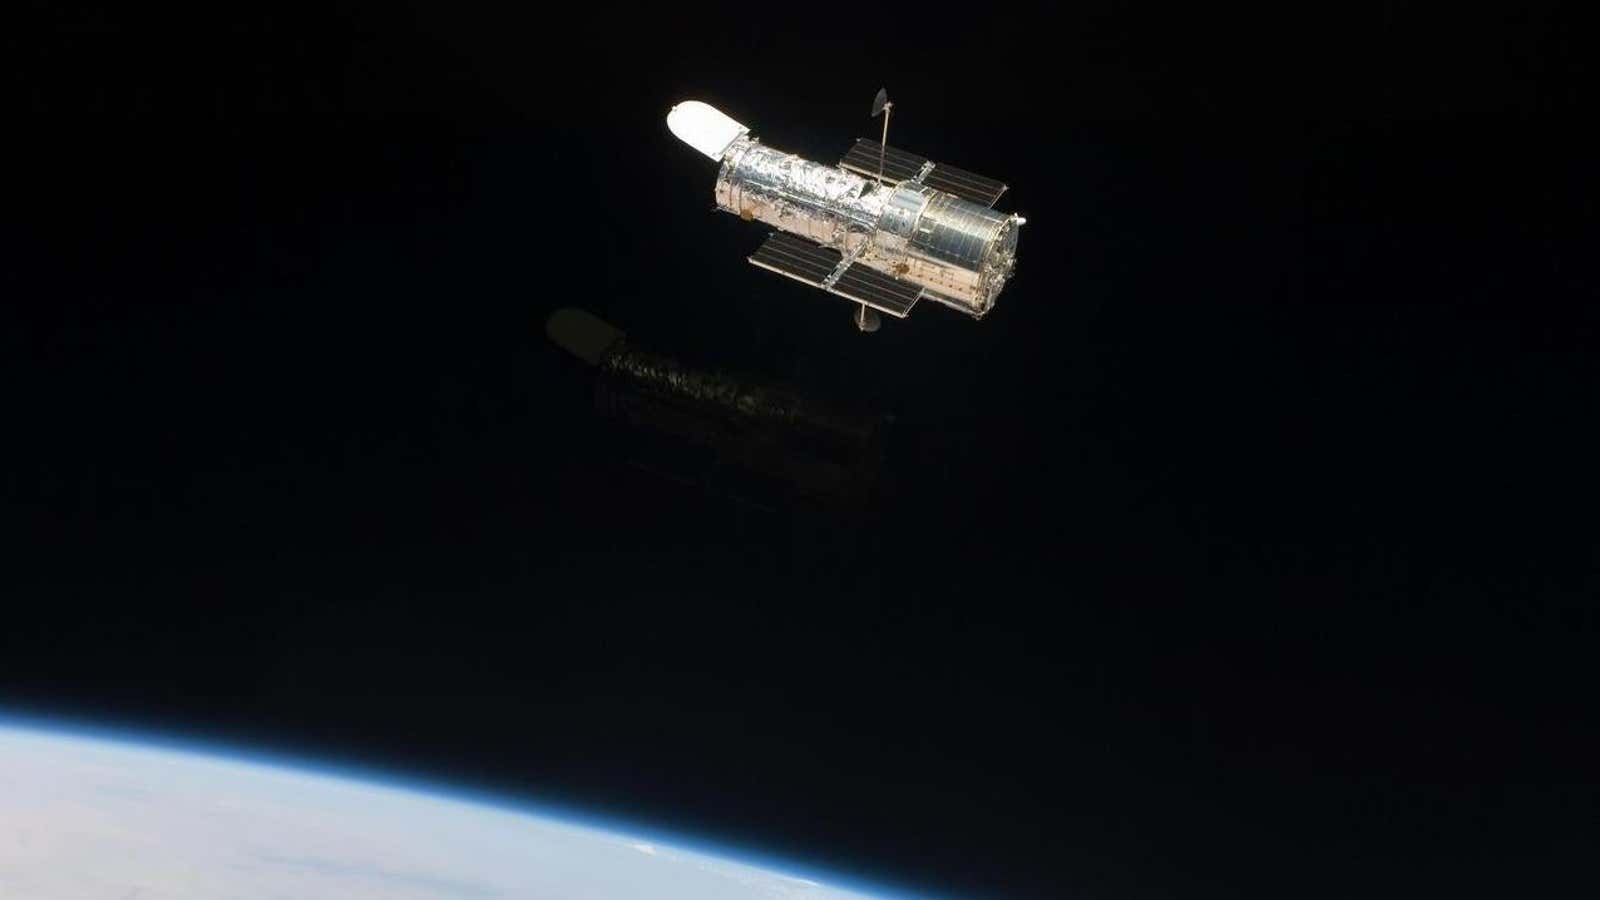 The Hubble Space Telescope in orbit over the Earth.